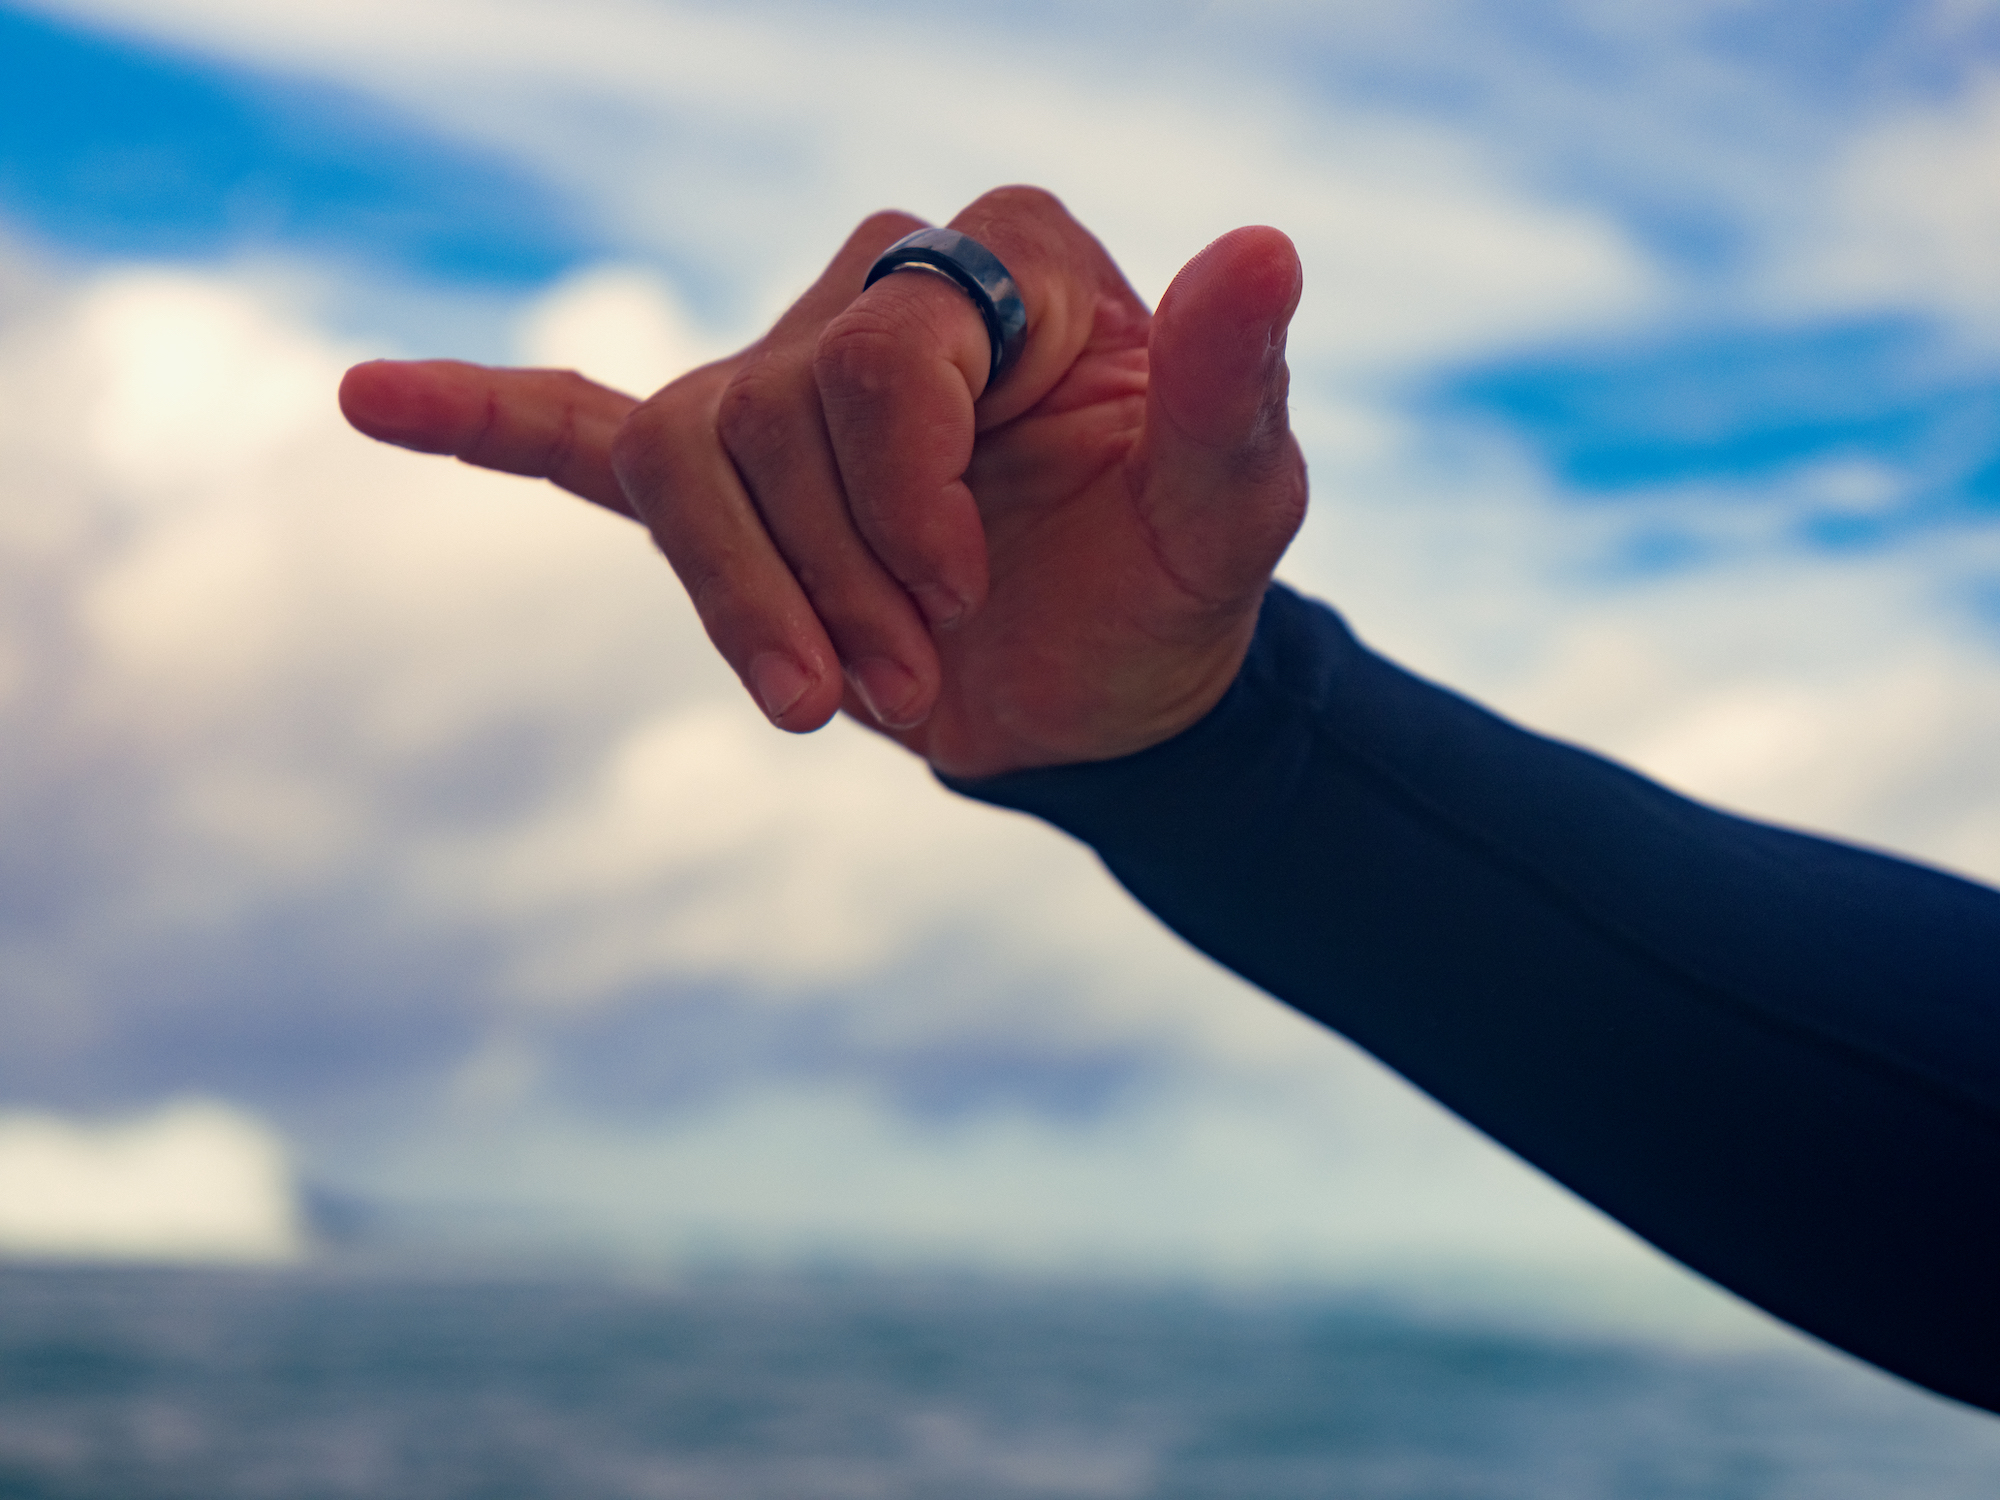 Pro Surfer Kai Lenny Wears the Oura Ring